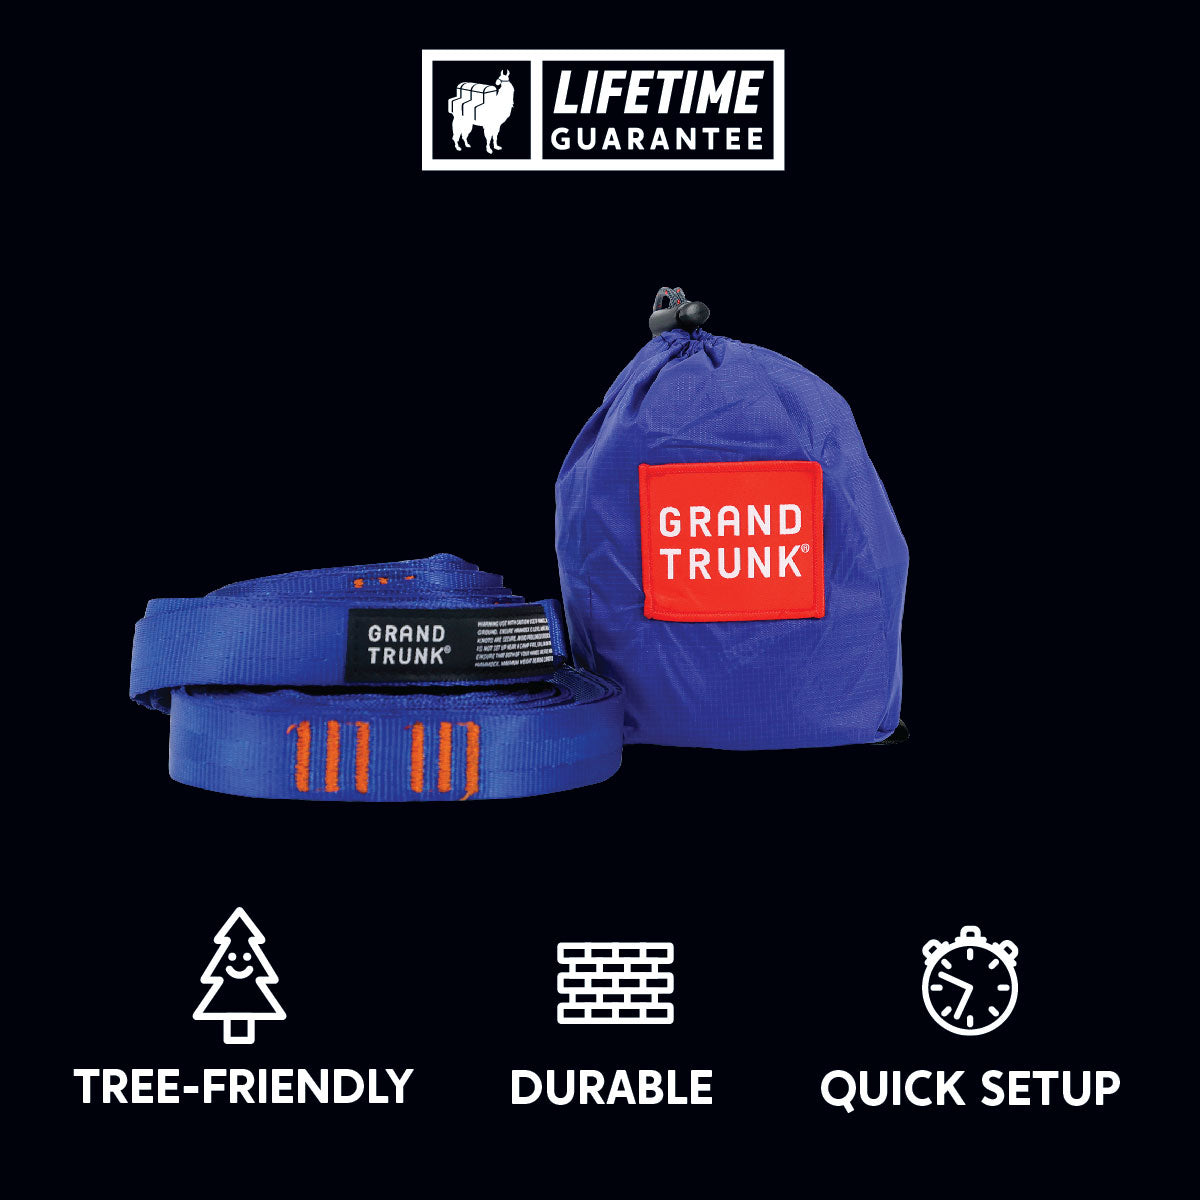 durable tree friendly webbing straps for hanging hammocks and gear outdoor indoor urban strong quick setup